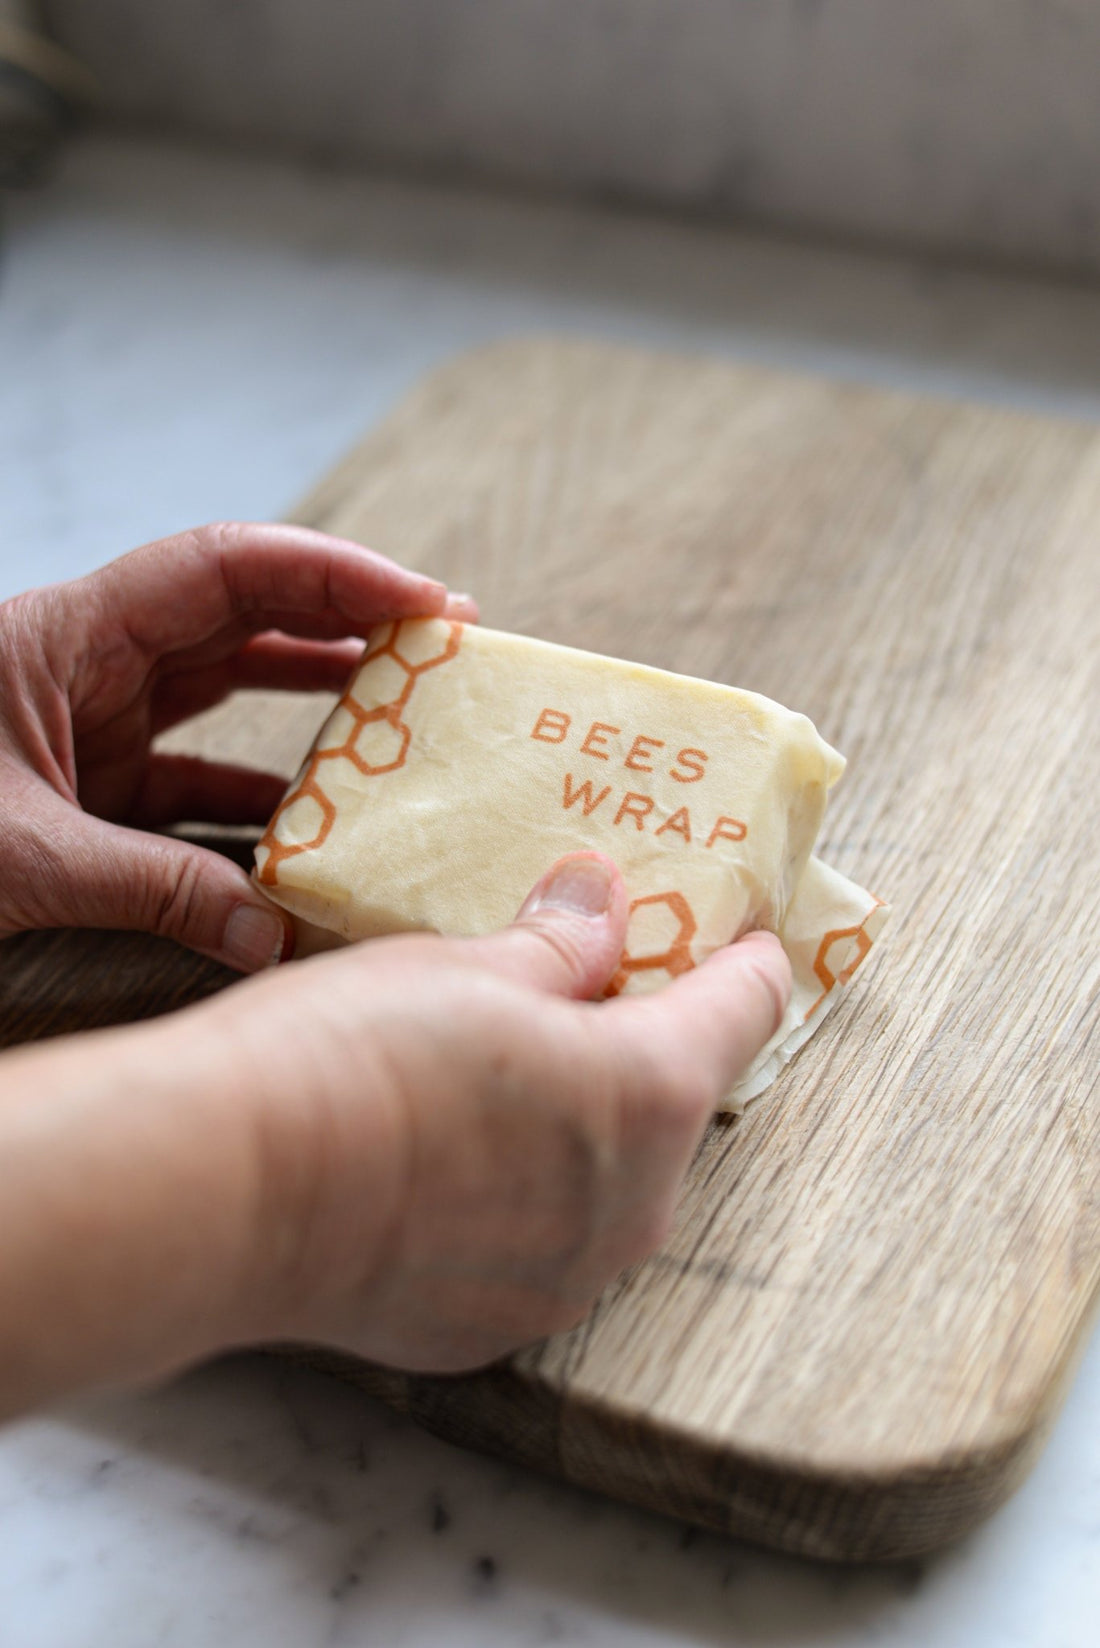 Make Your Own Beeswax Wraps In 5 Simple Steps - BZZWAX